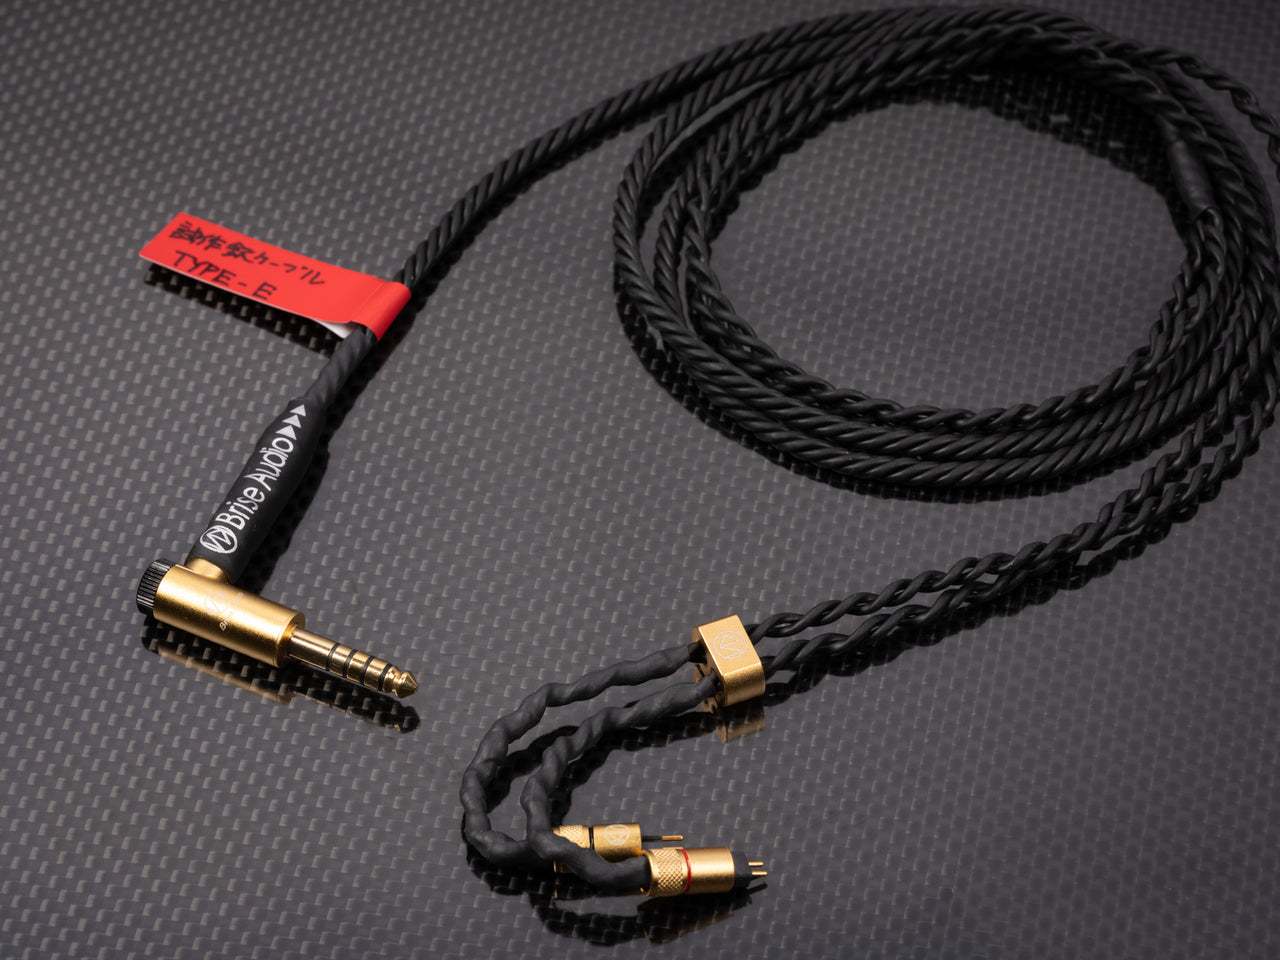 Prototype version of Brise Audio's first silver wire cable to go on sale February 17 at 6:00 p.m.